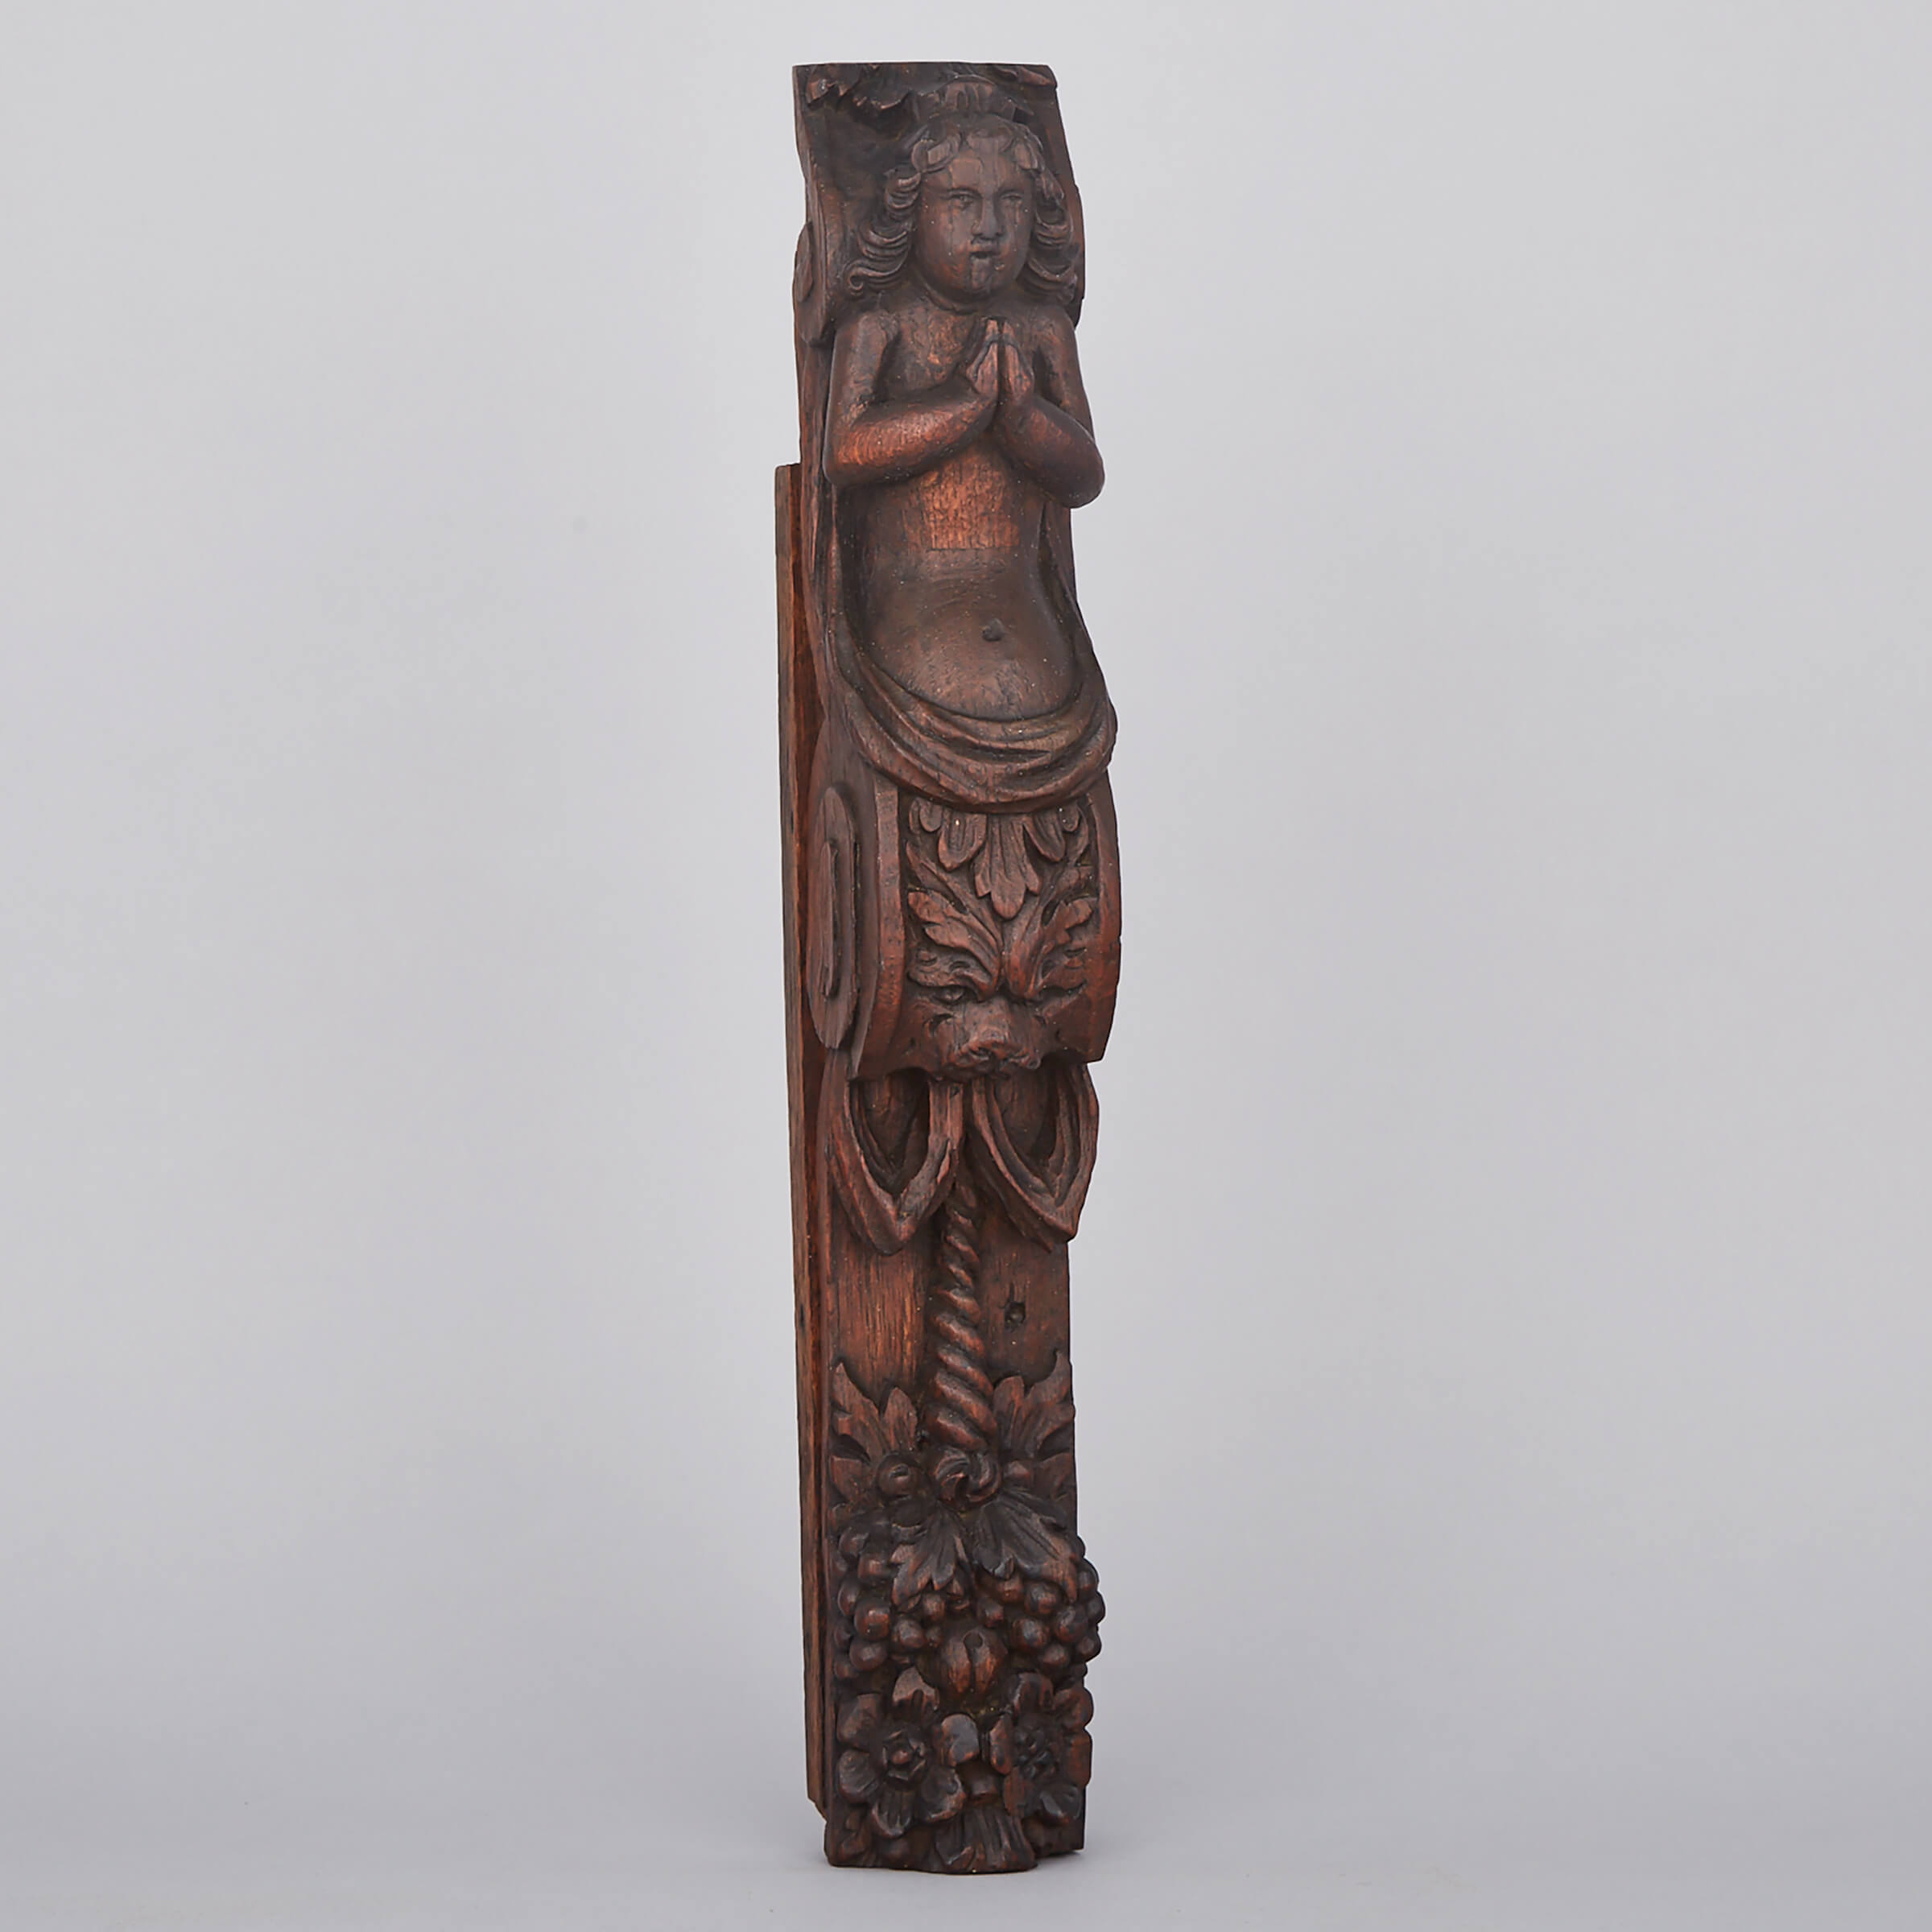 English Carved Oak Figural Term, 17th century